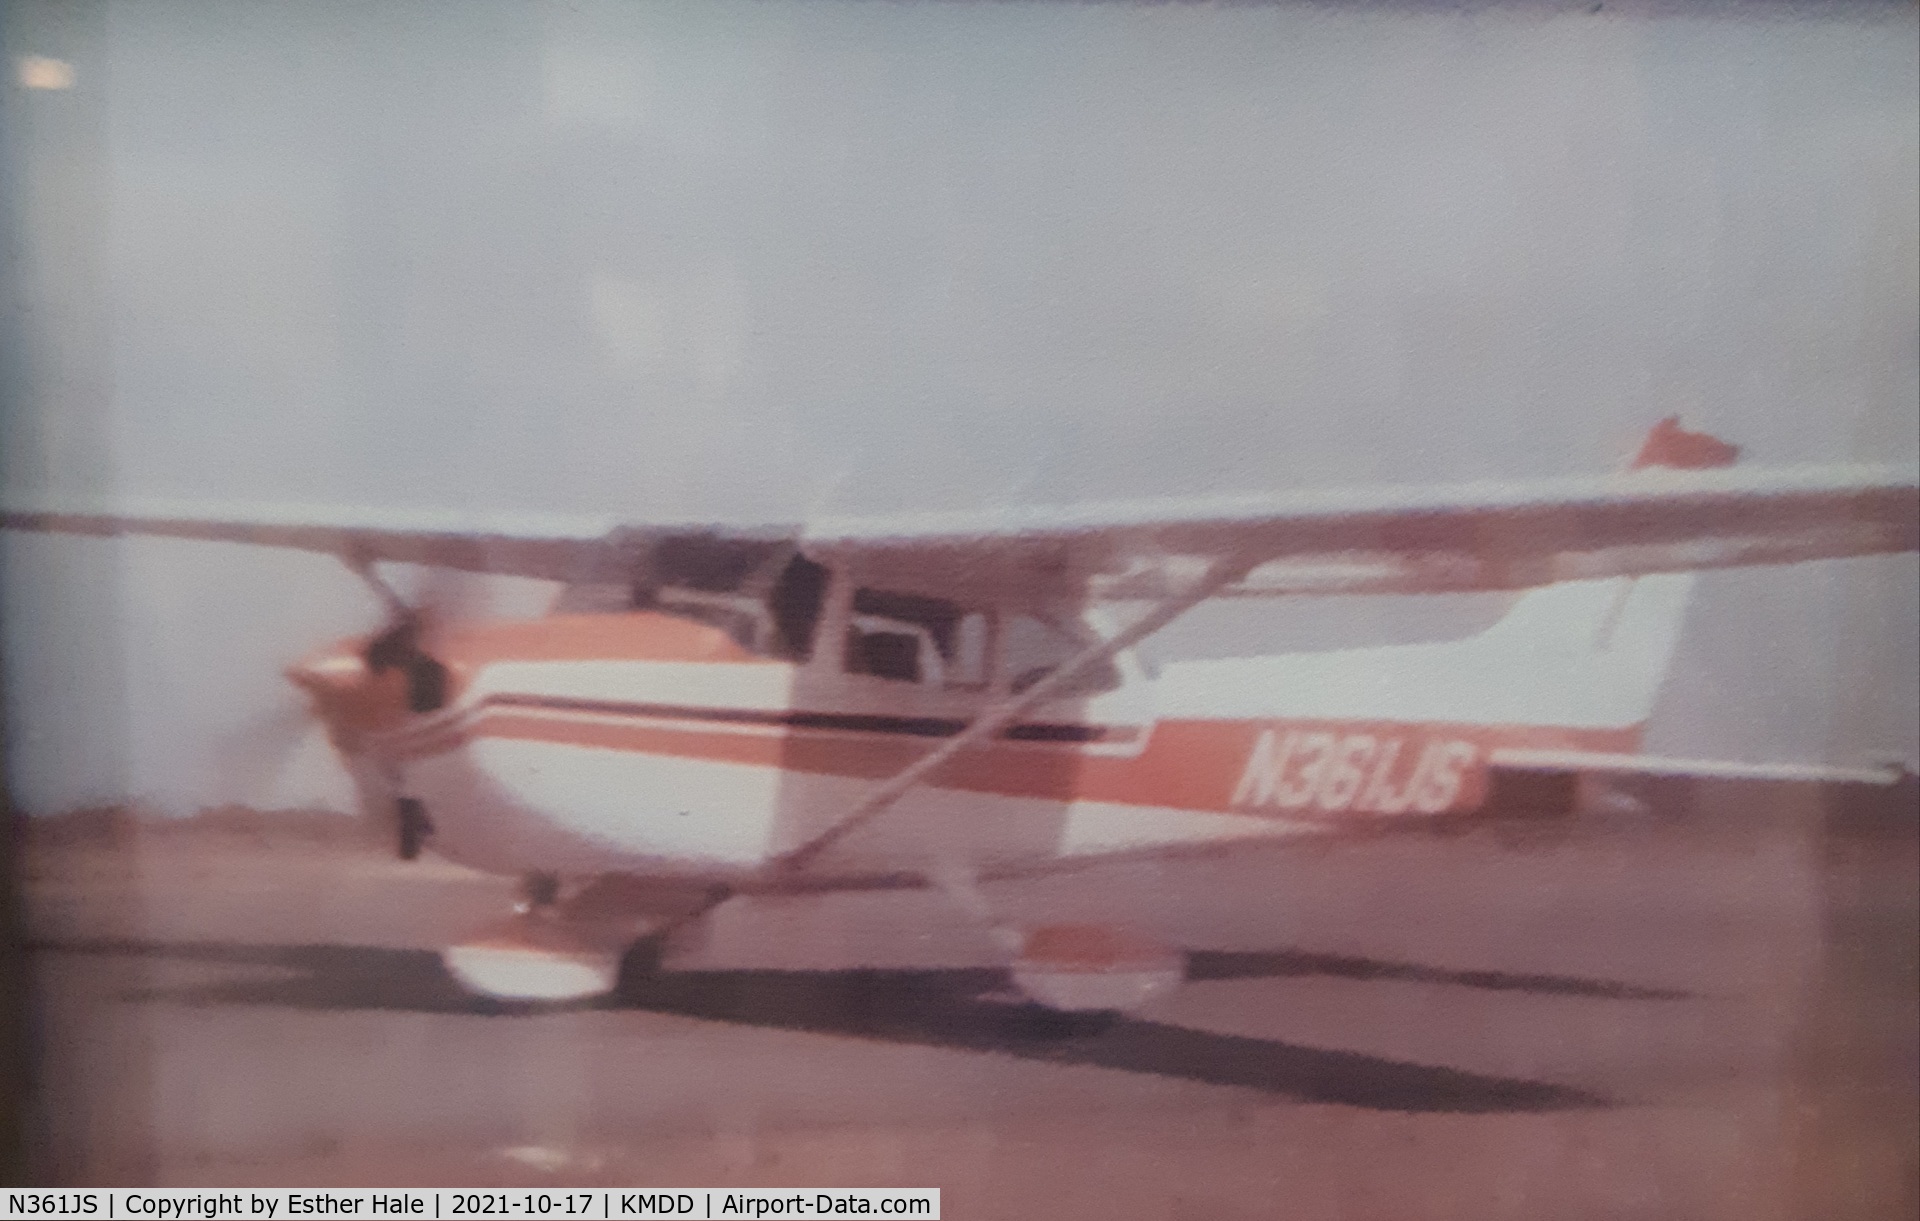 N361JS, 1974 Cessna 172M C/N 17264182, About 1980 in Midland Texas. Based in Tom Bean Texas.